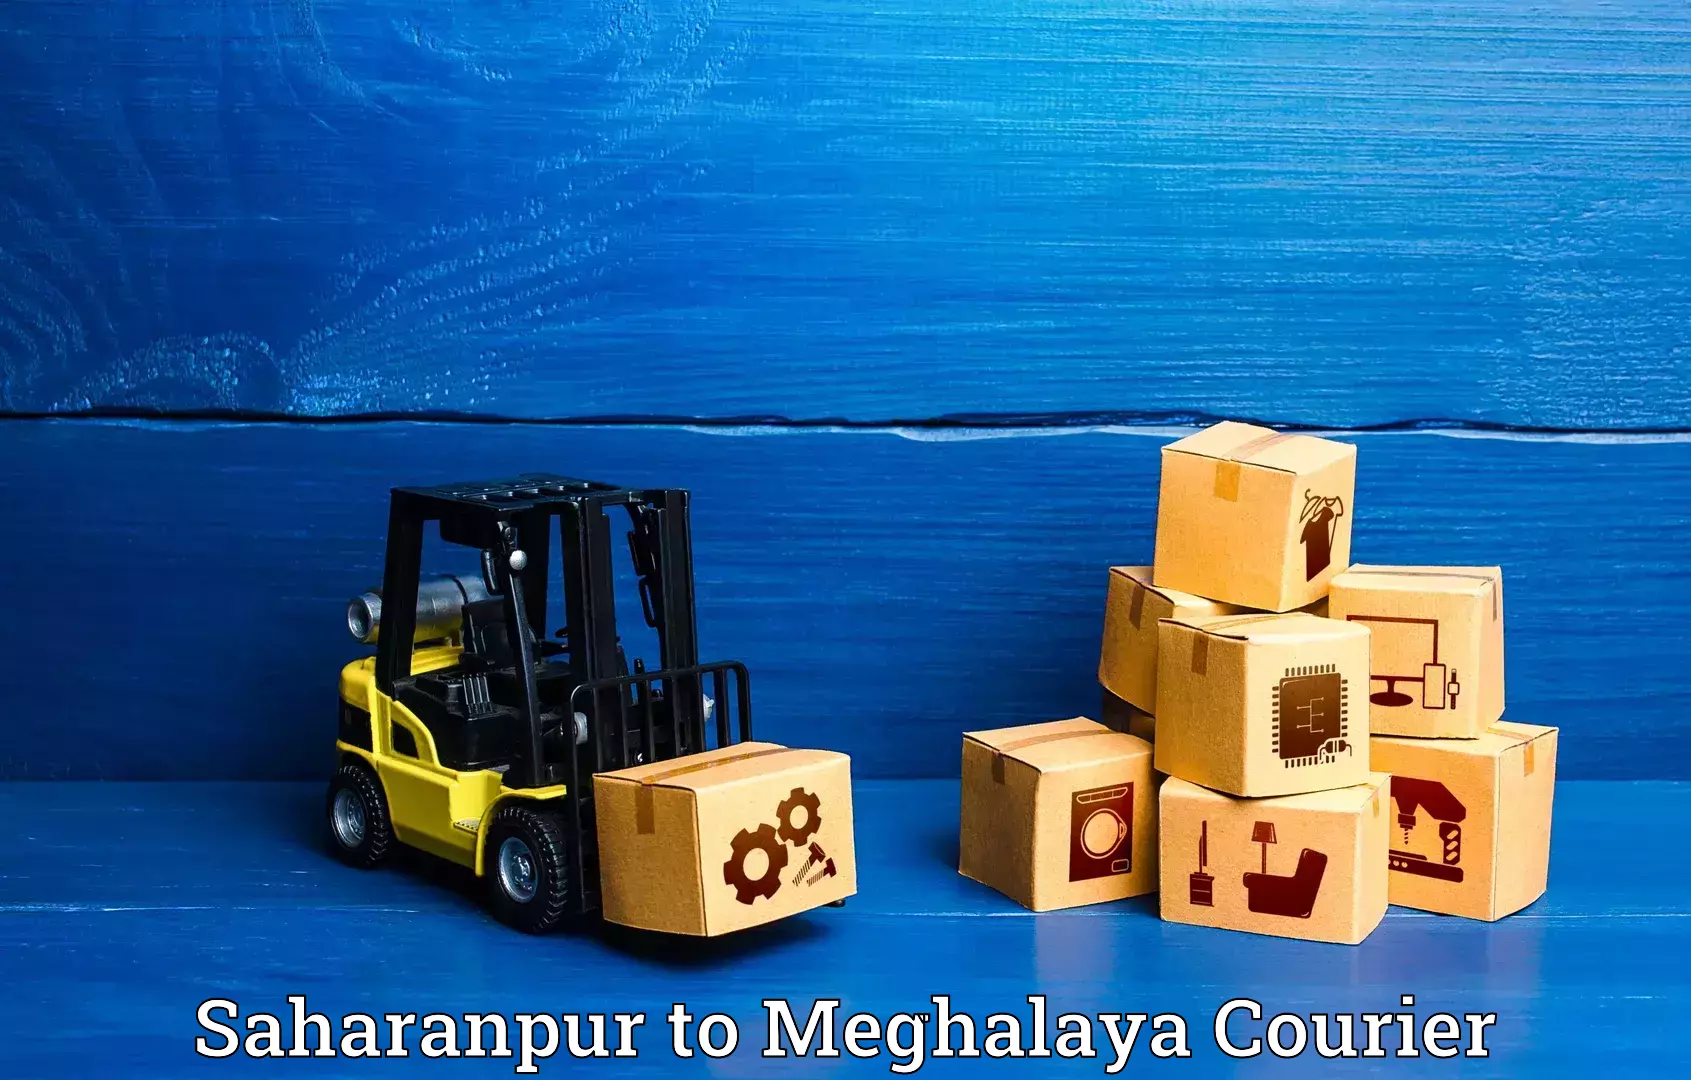 Luggage shipment specialists Saharanpur to Shillong